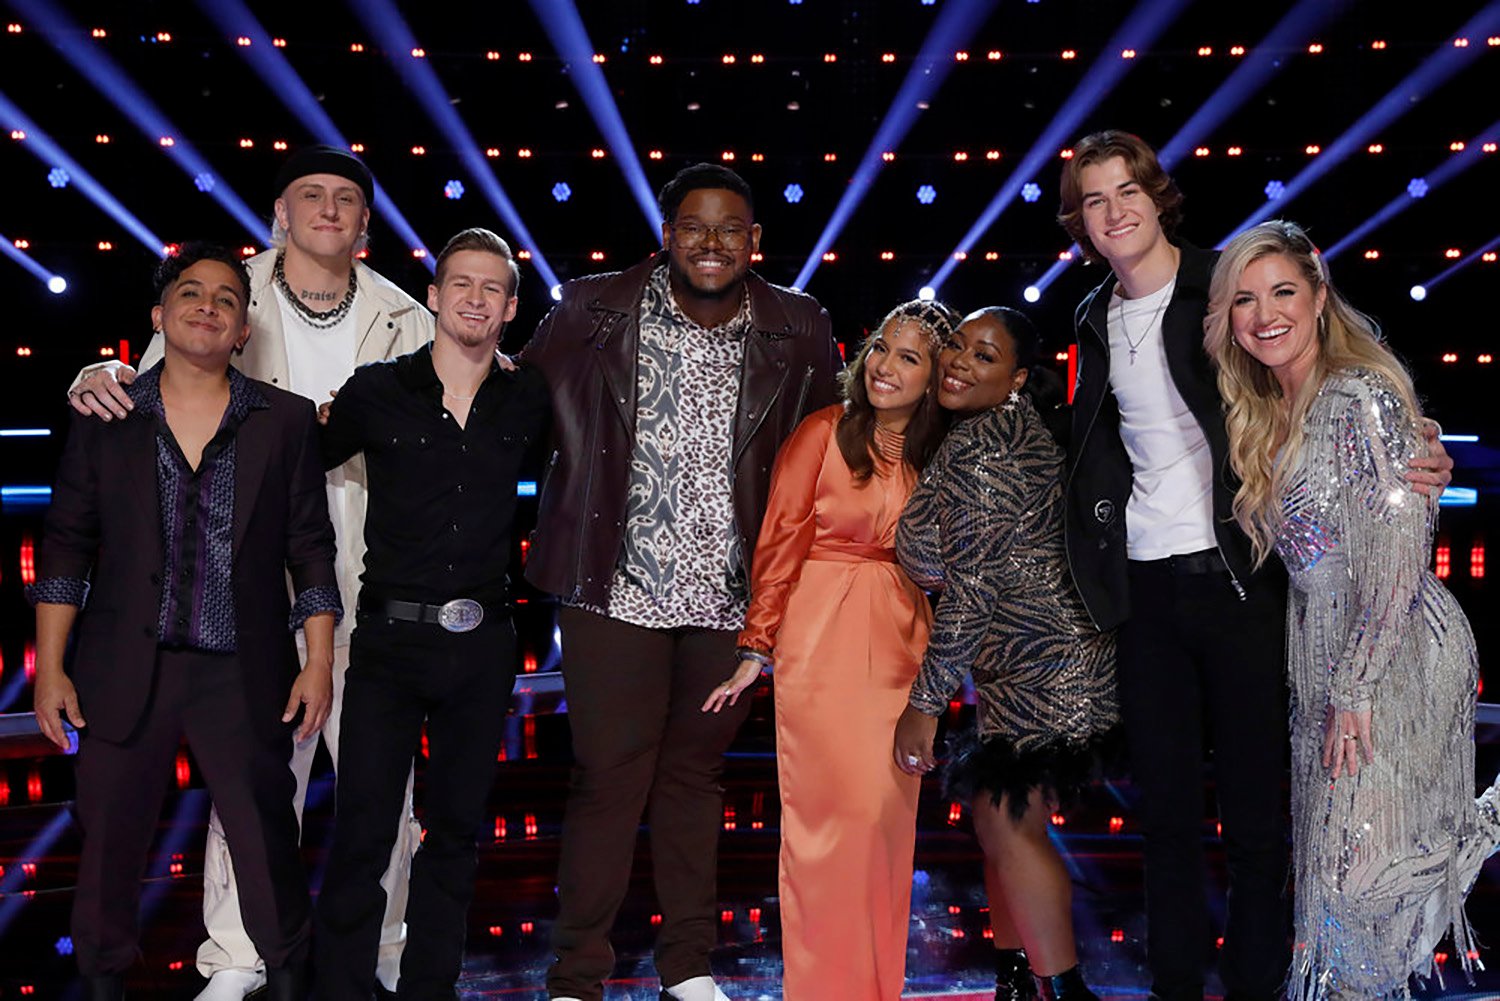 'The Voice' Season 22 Who Went Home Last Night, Nov. 29? Top 8 Revealed